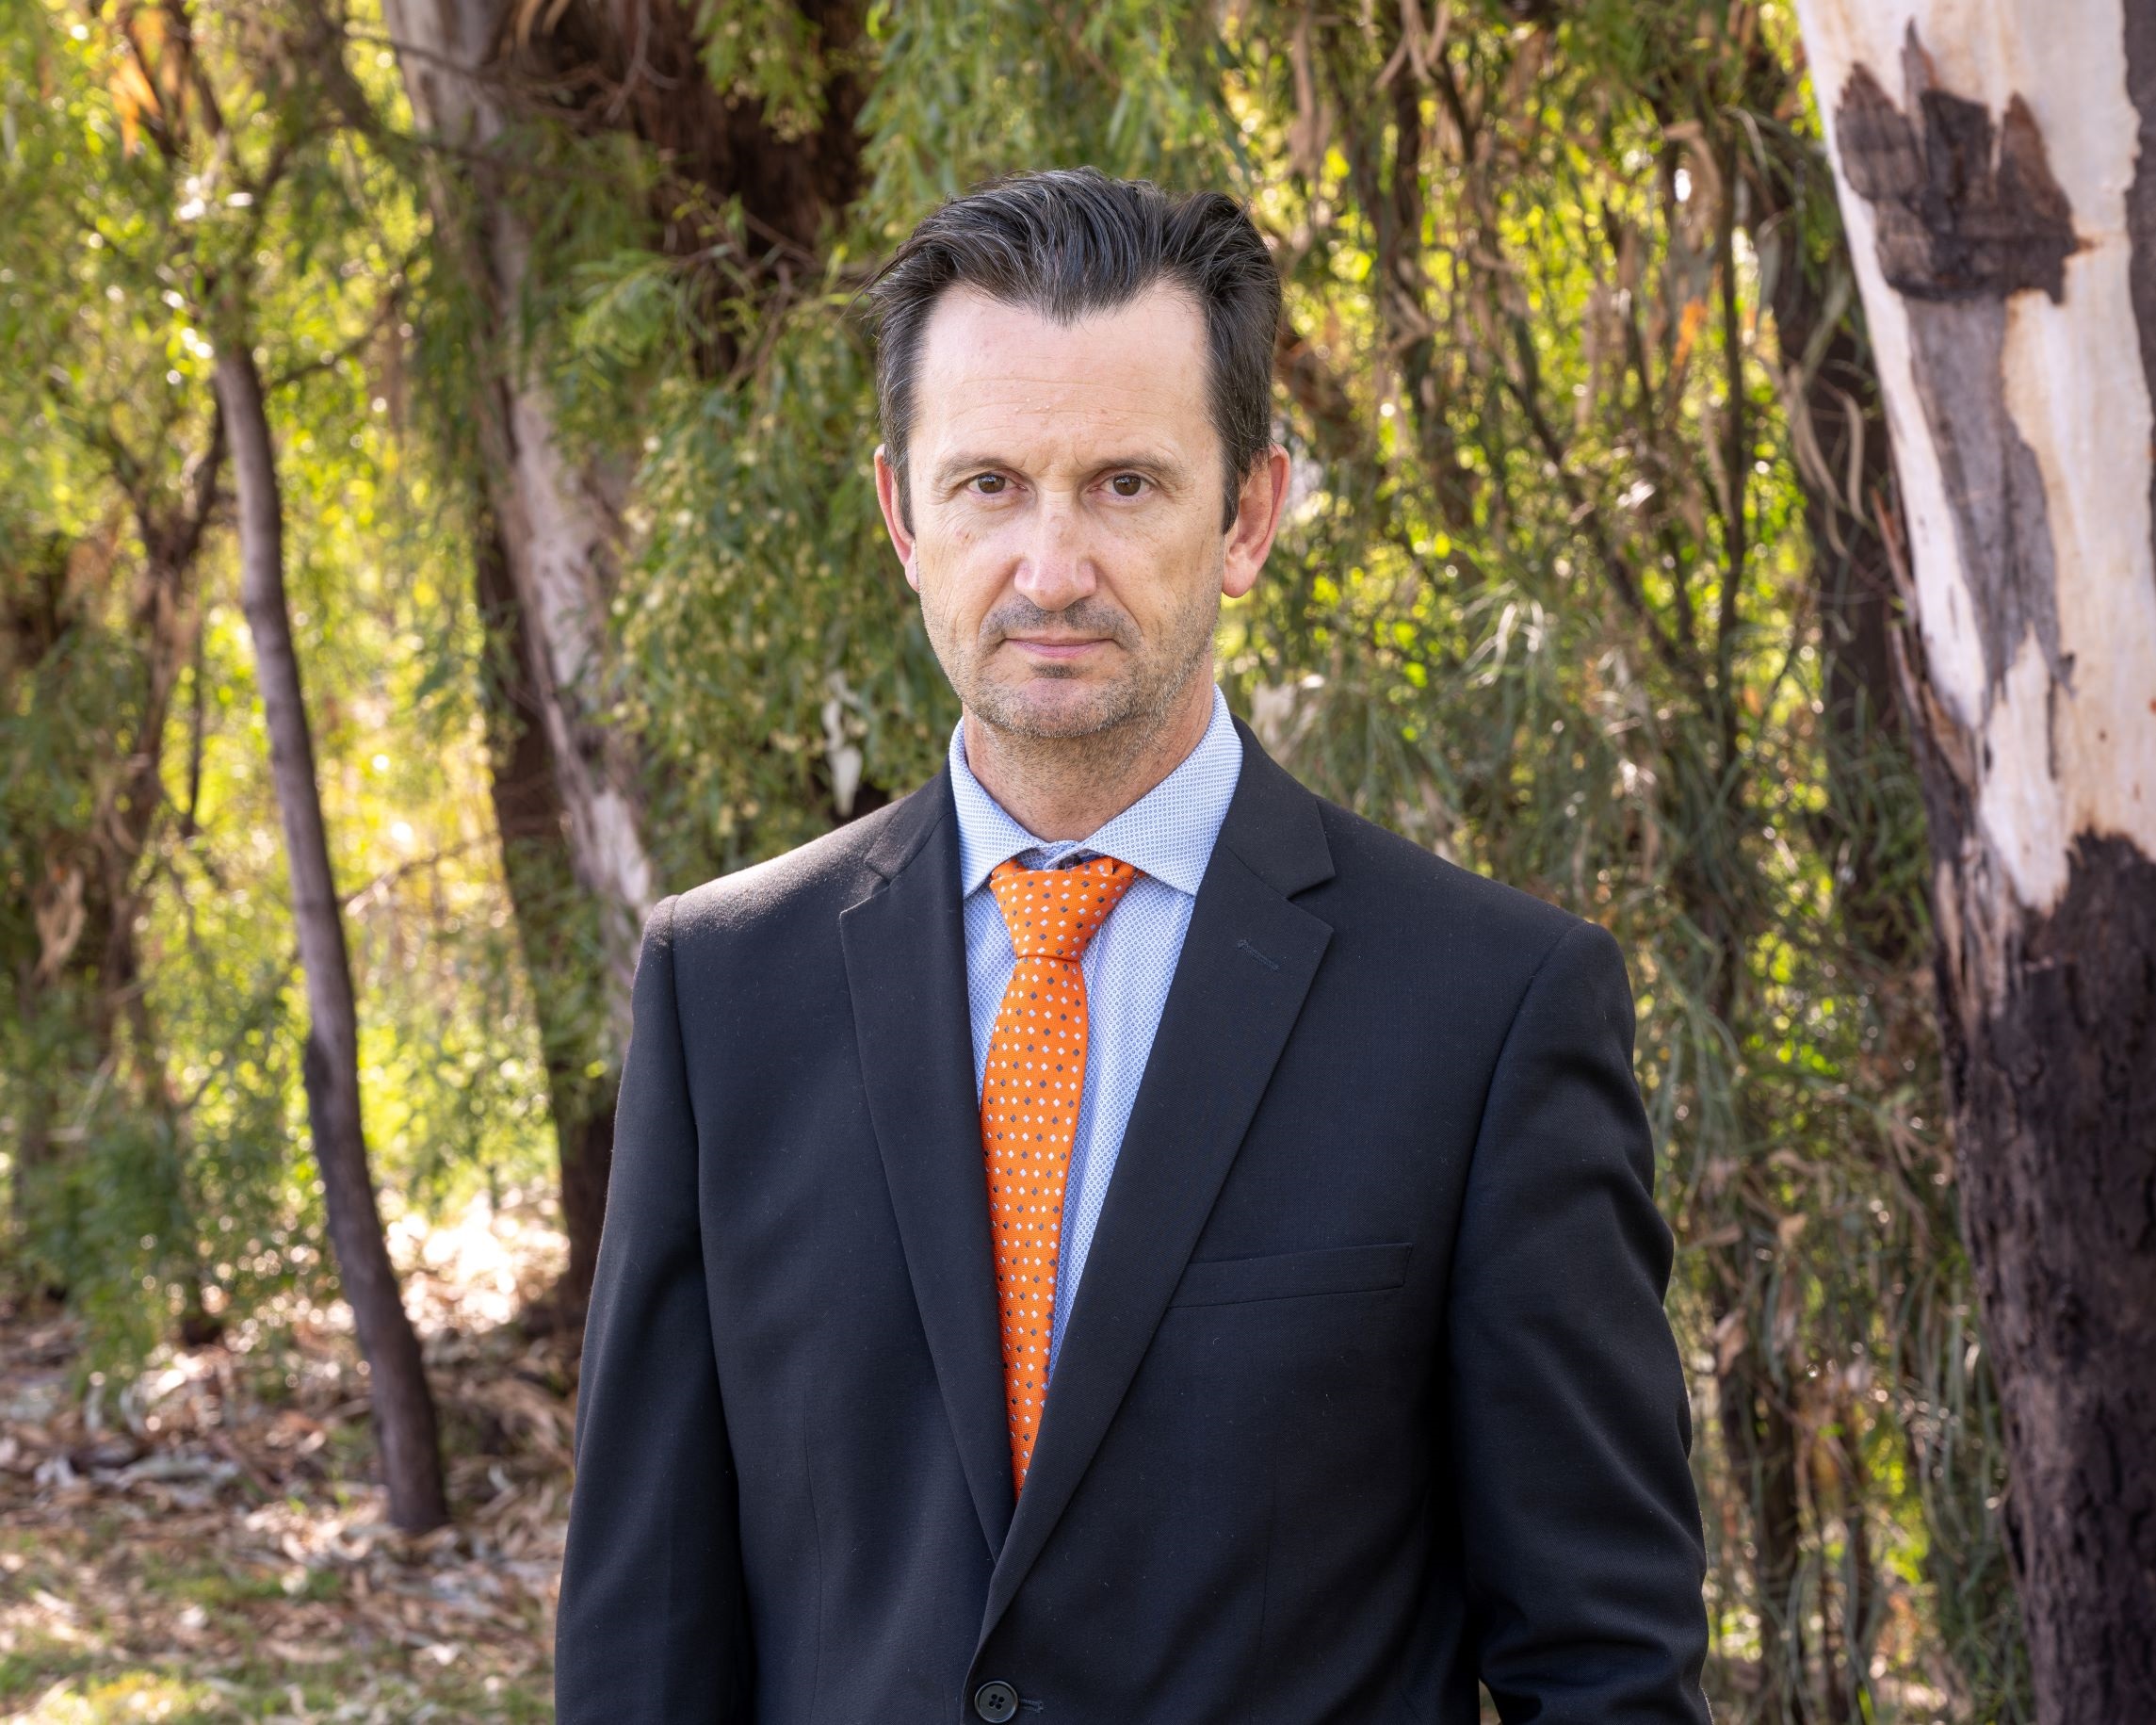 GM Brett Bacon stands in a suit in front of greenery and trees.